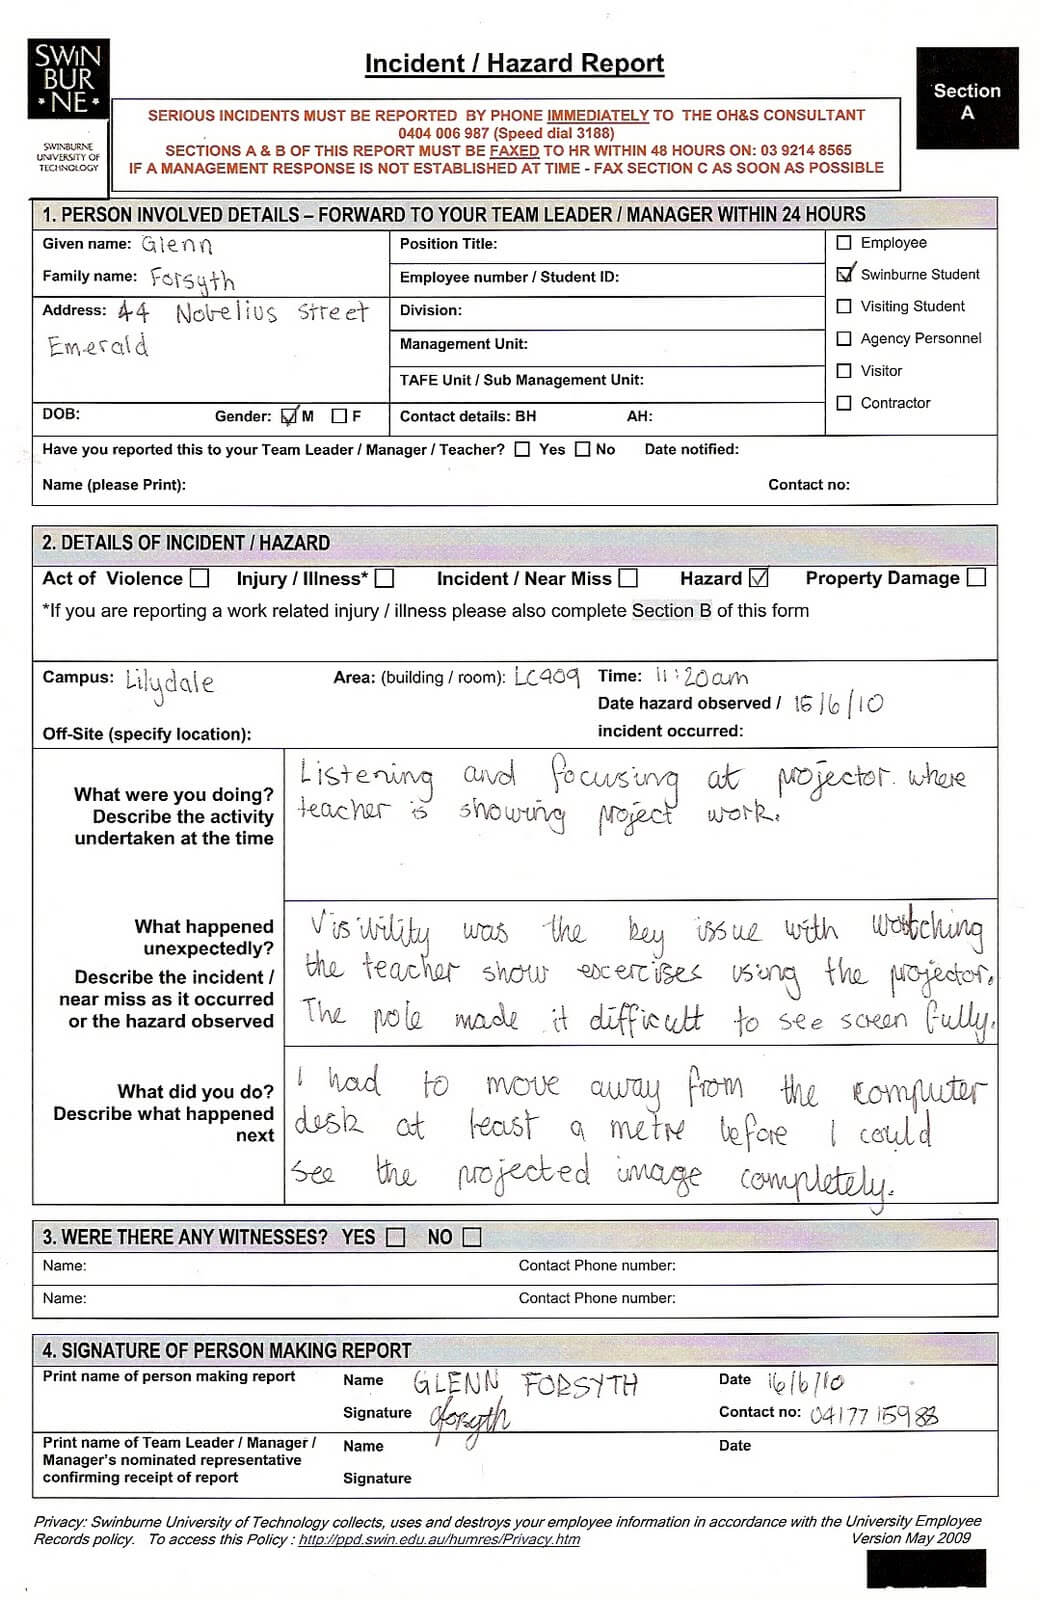 Health And Safety Report Template] Incident Action And Site For Incident Hazard Report Form Template